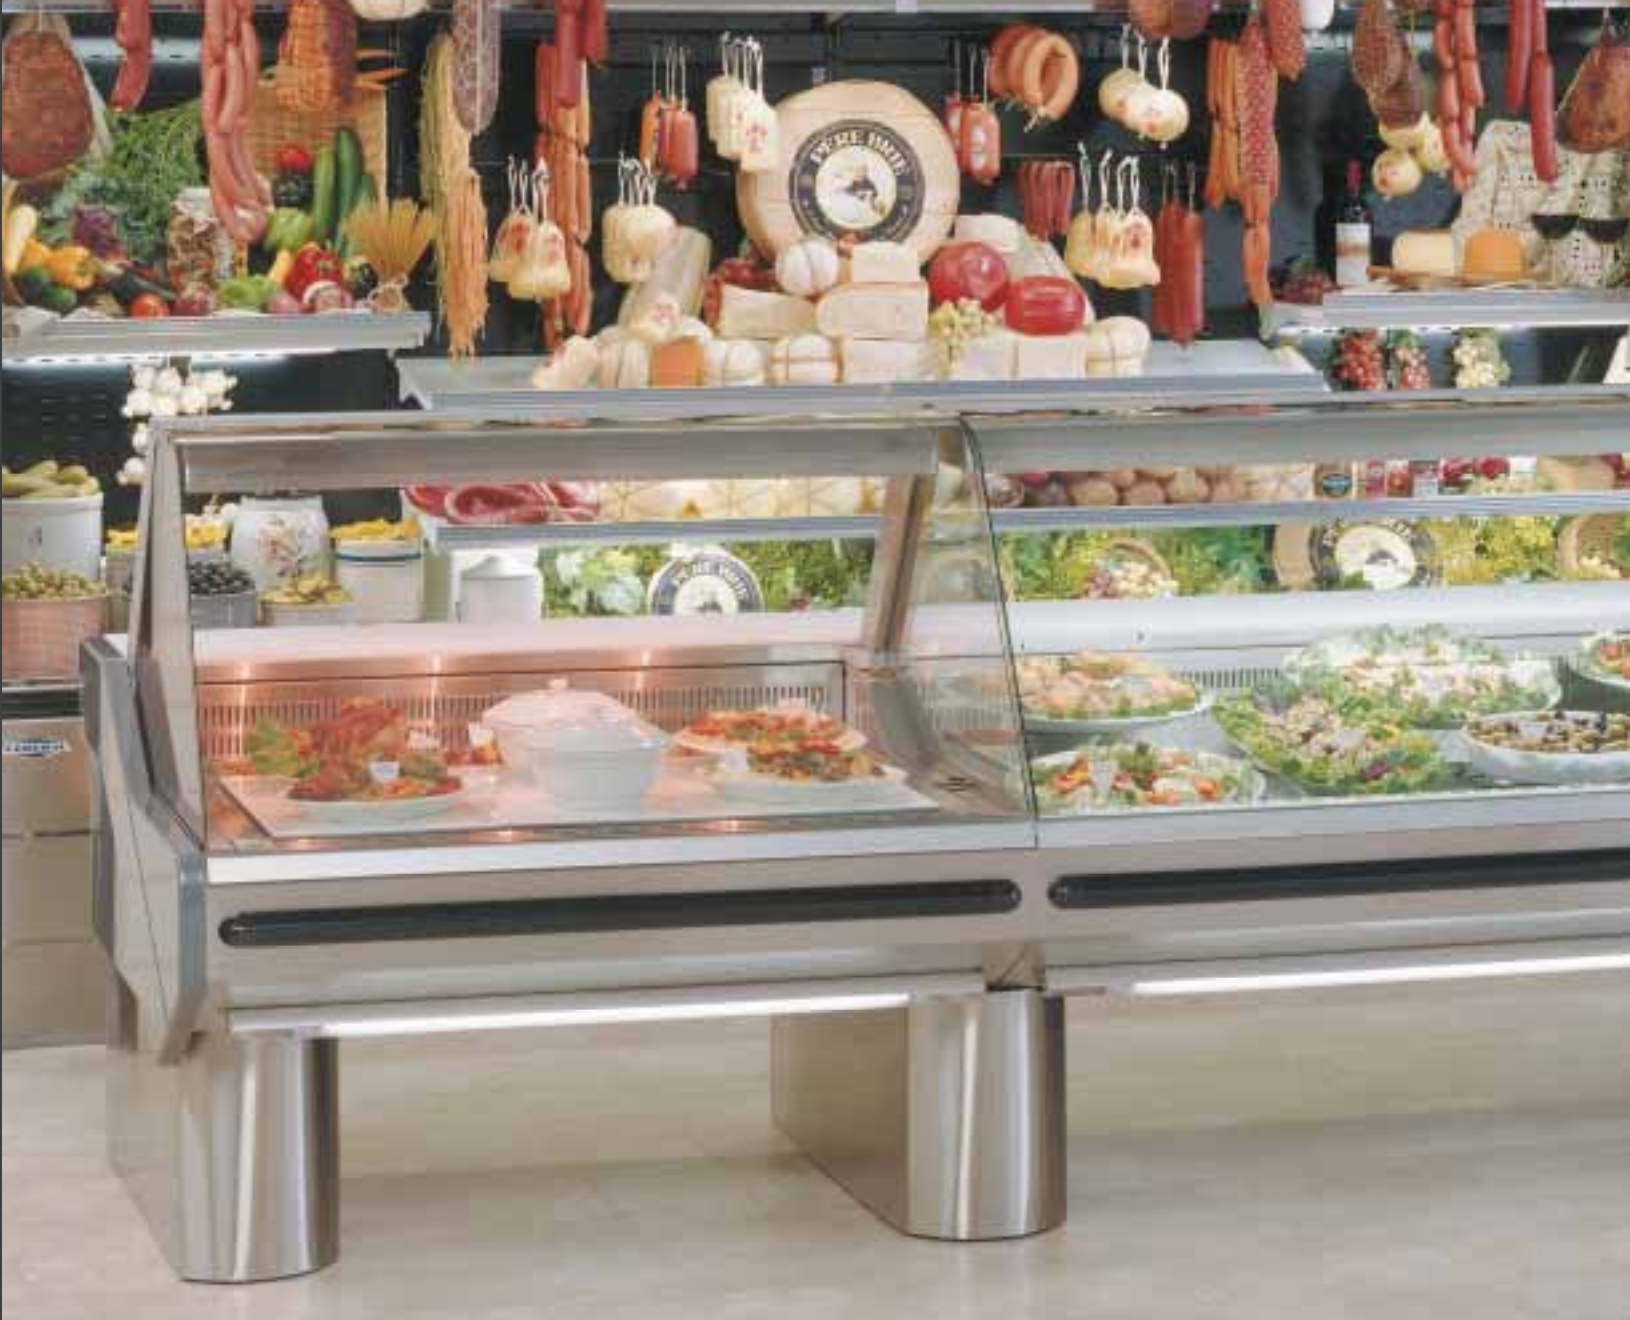 Four Tips for Food Displays